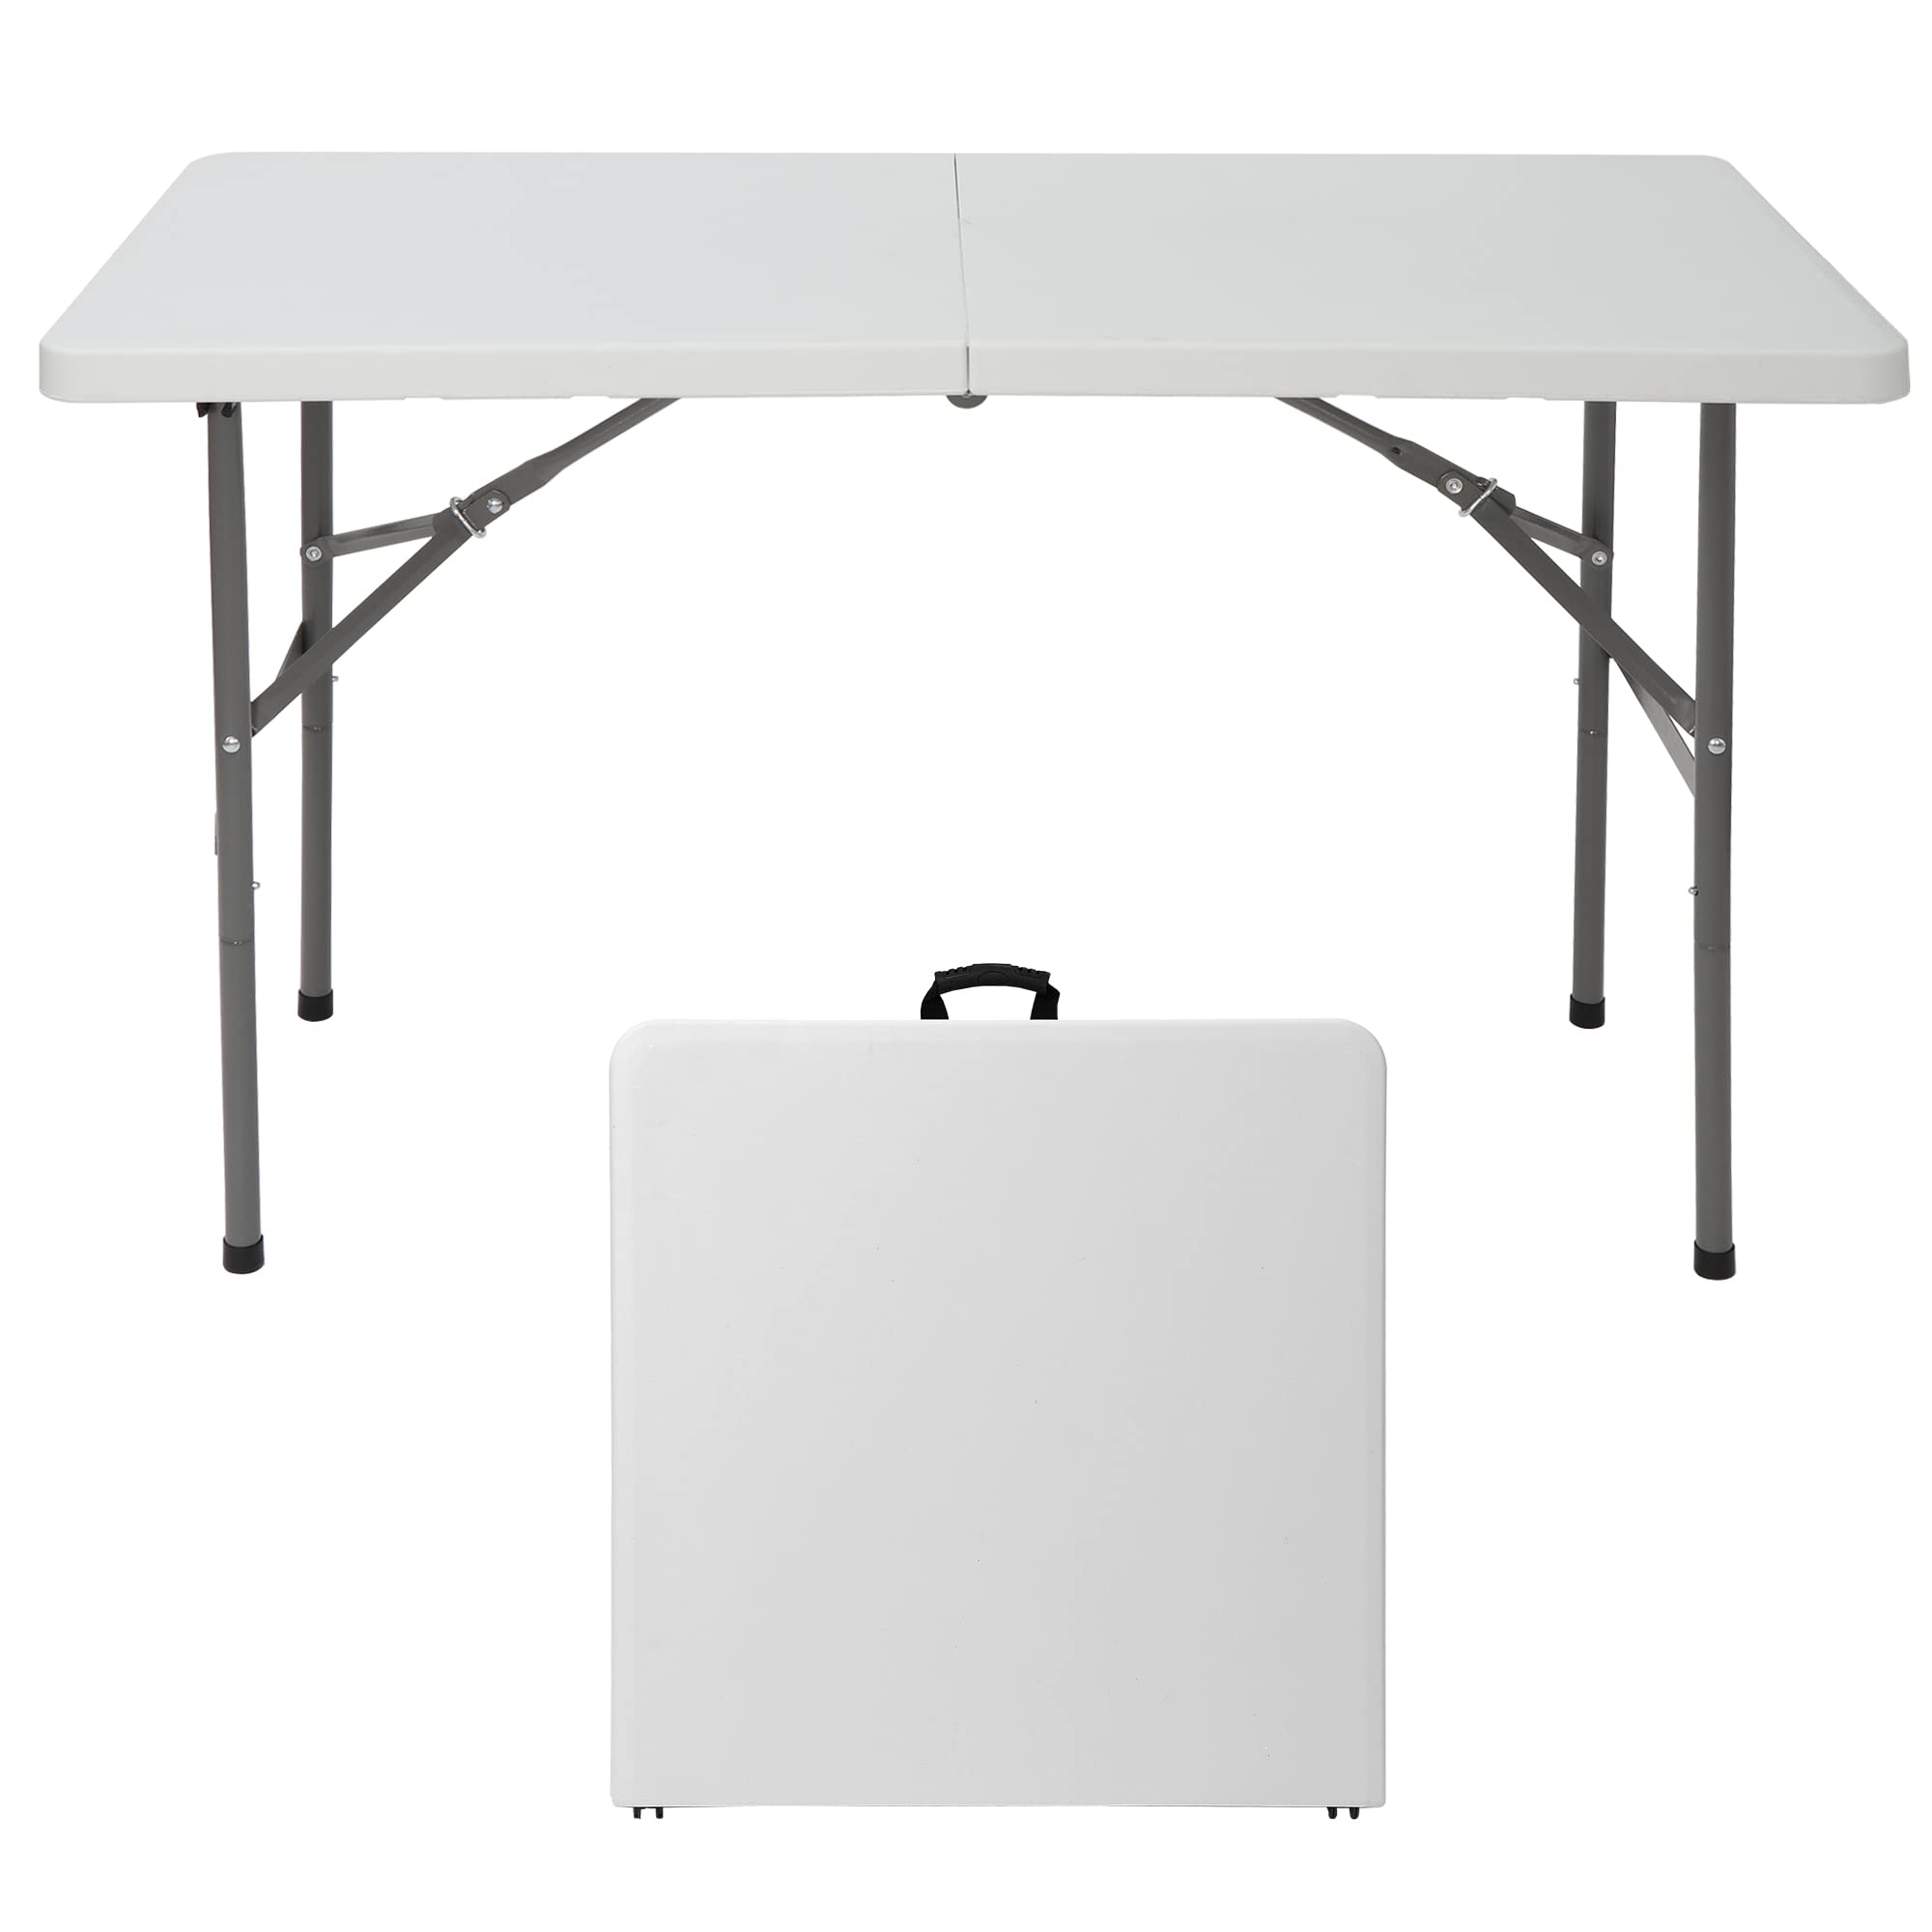 ZenStyle 4 ft Indoor Outdoor Heavy Duty Plastic Folding Table Portable Picnic Table Fold-in-Half Utility Table w/Handle and Stee